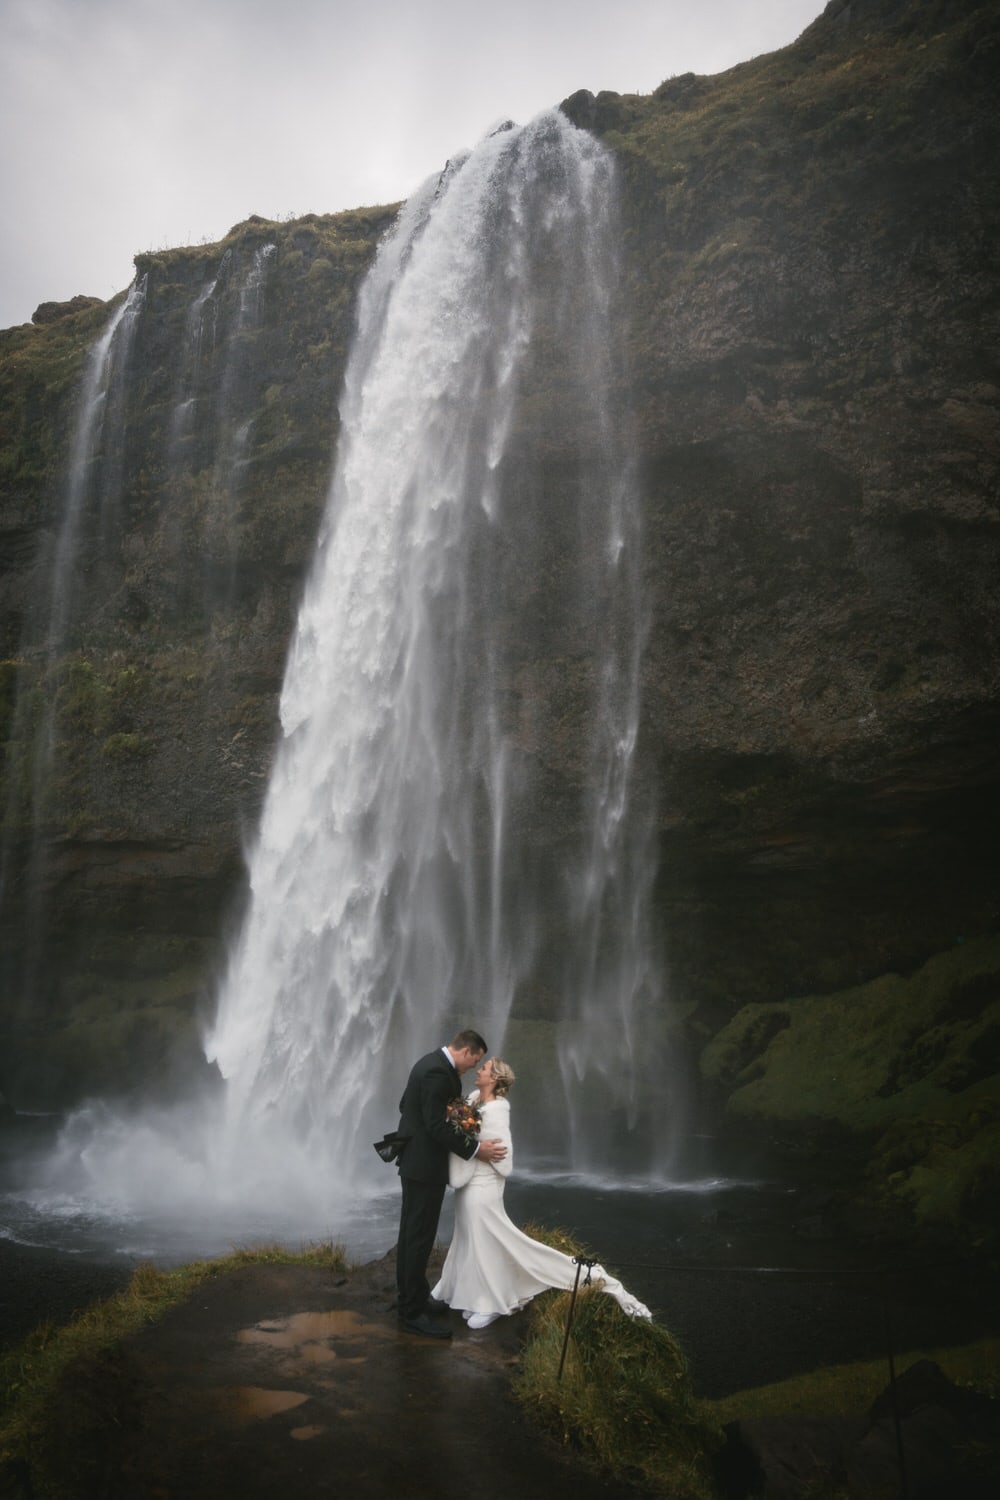 How to legally elope in Iceland